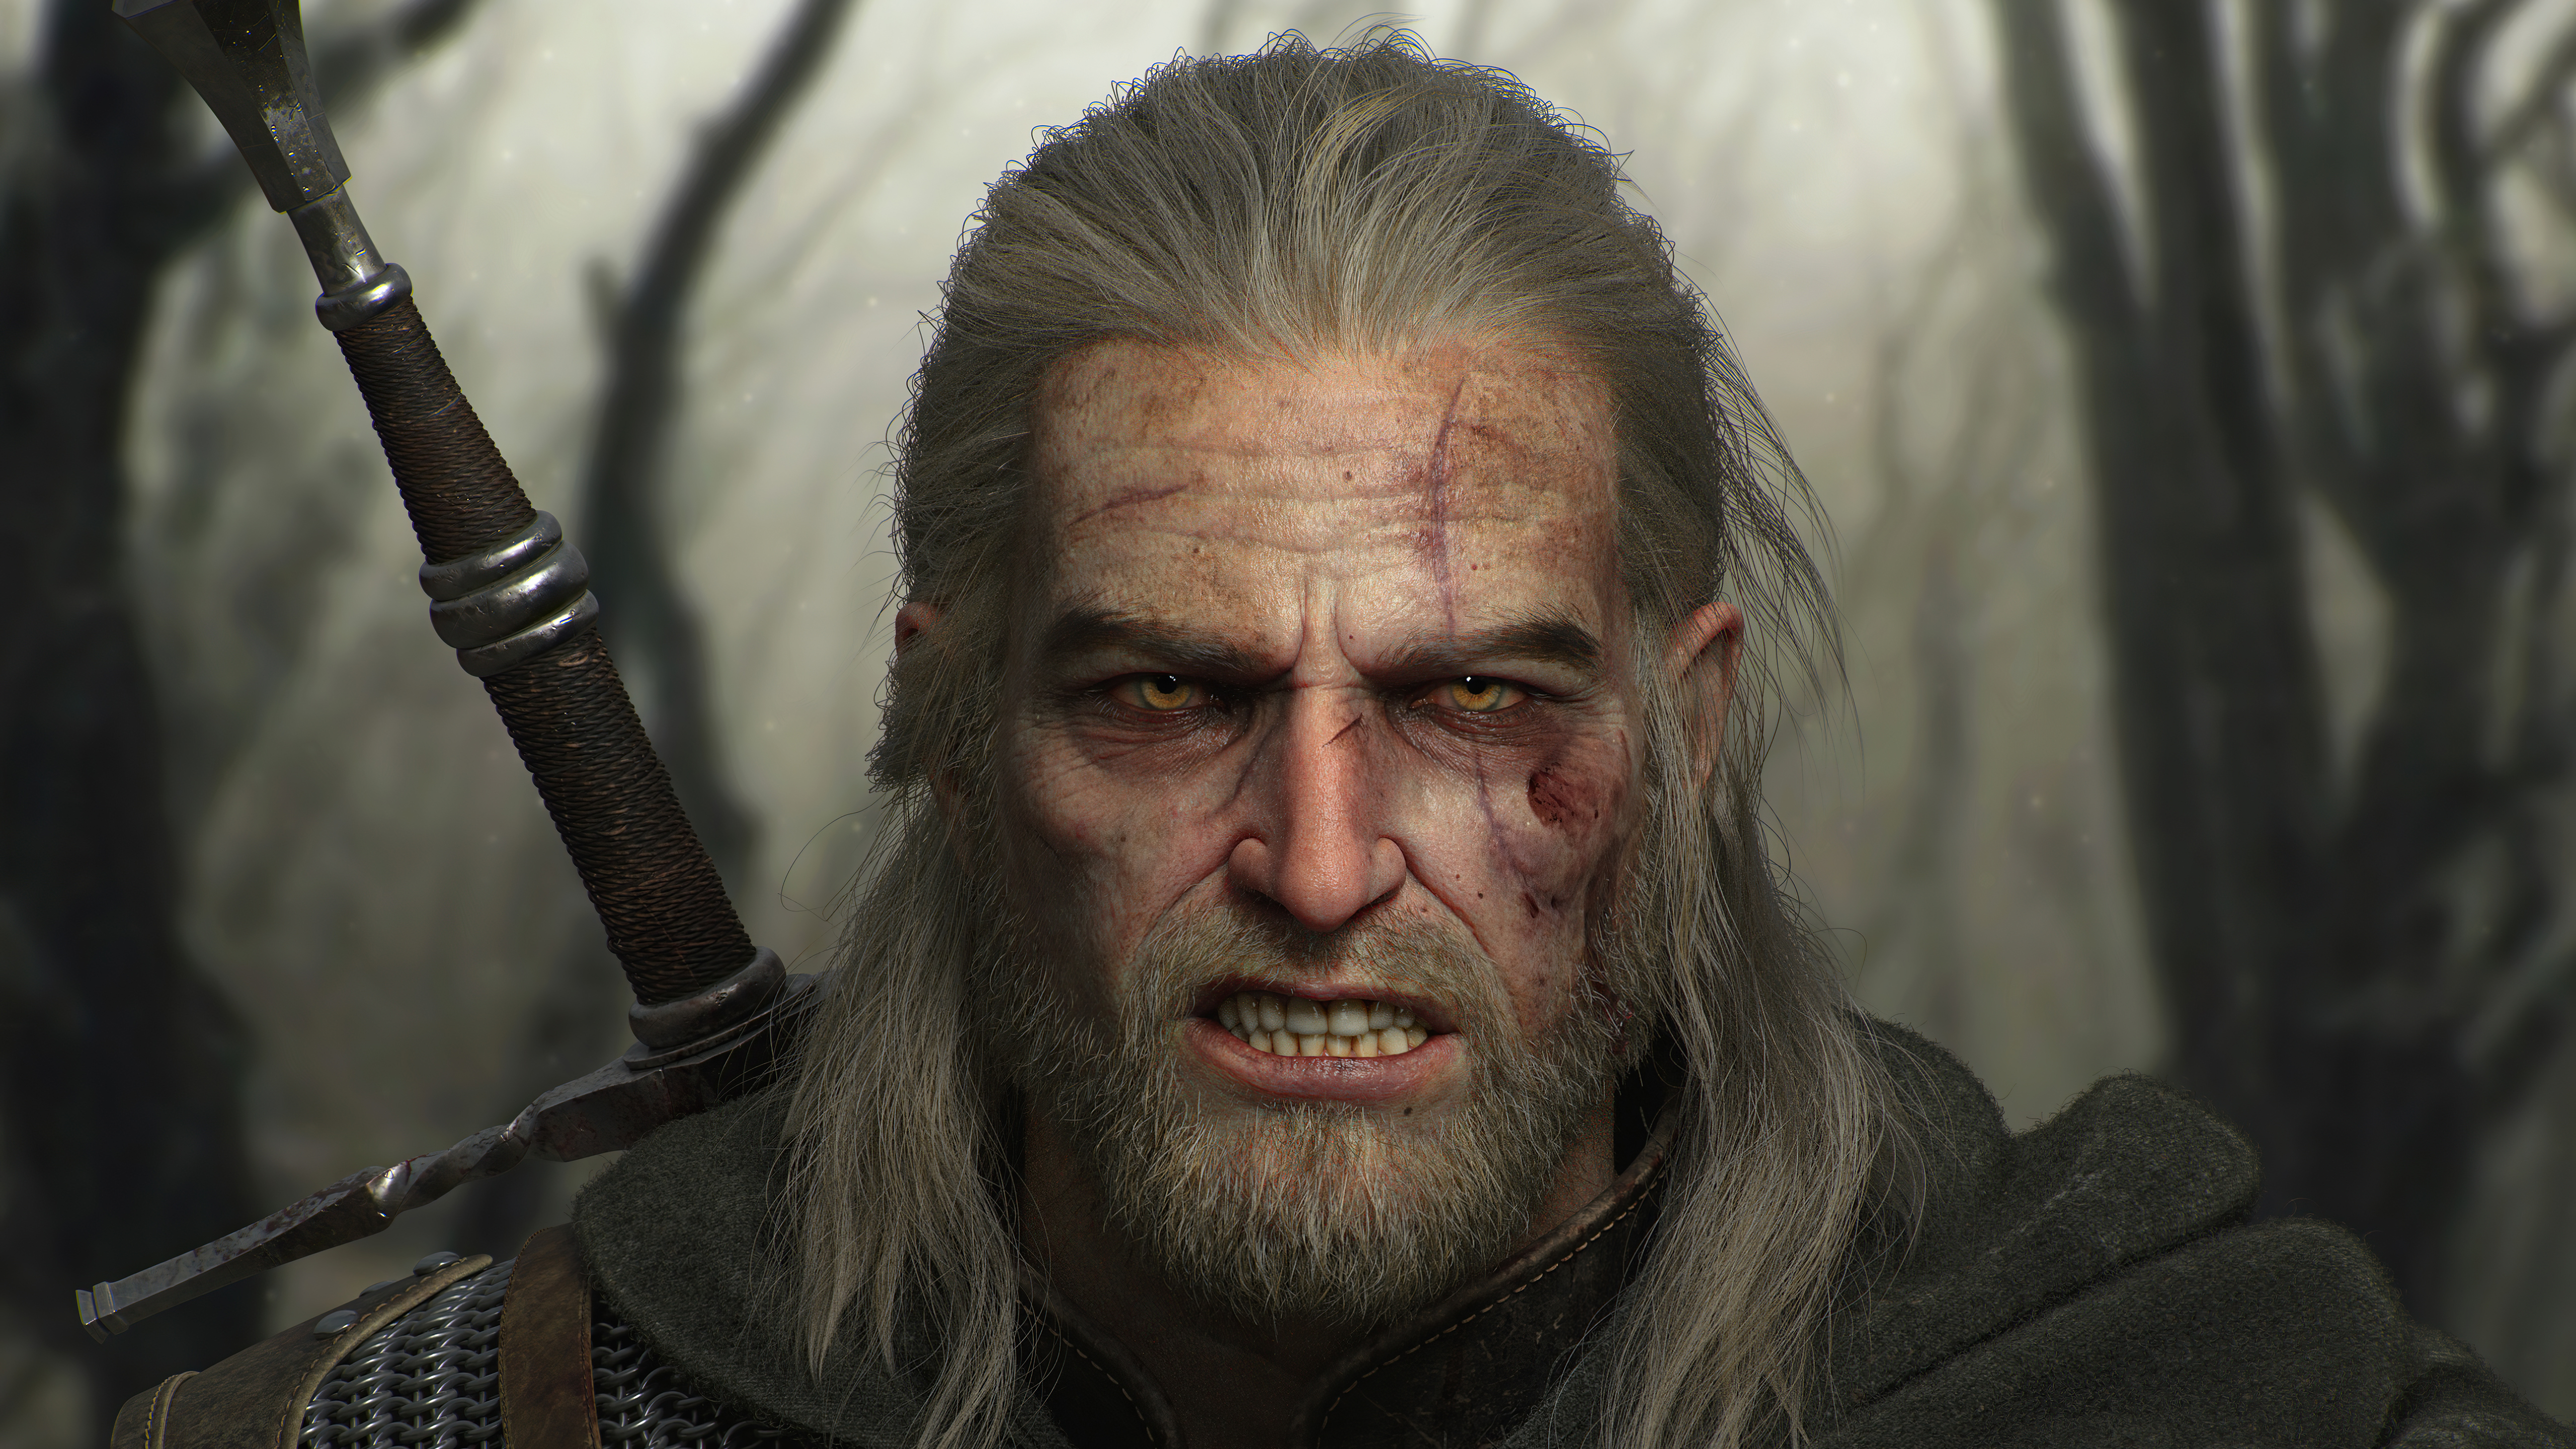 Video Game The Witcher 3: Wild Hunt 4k Ultra HD Wallpaper